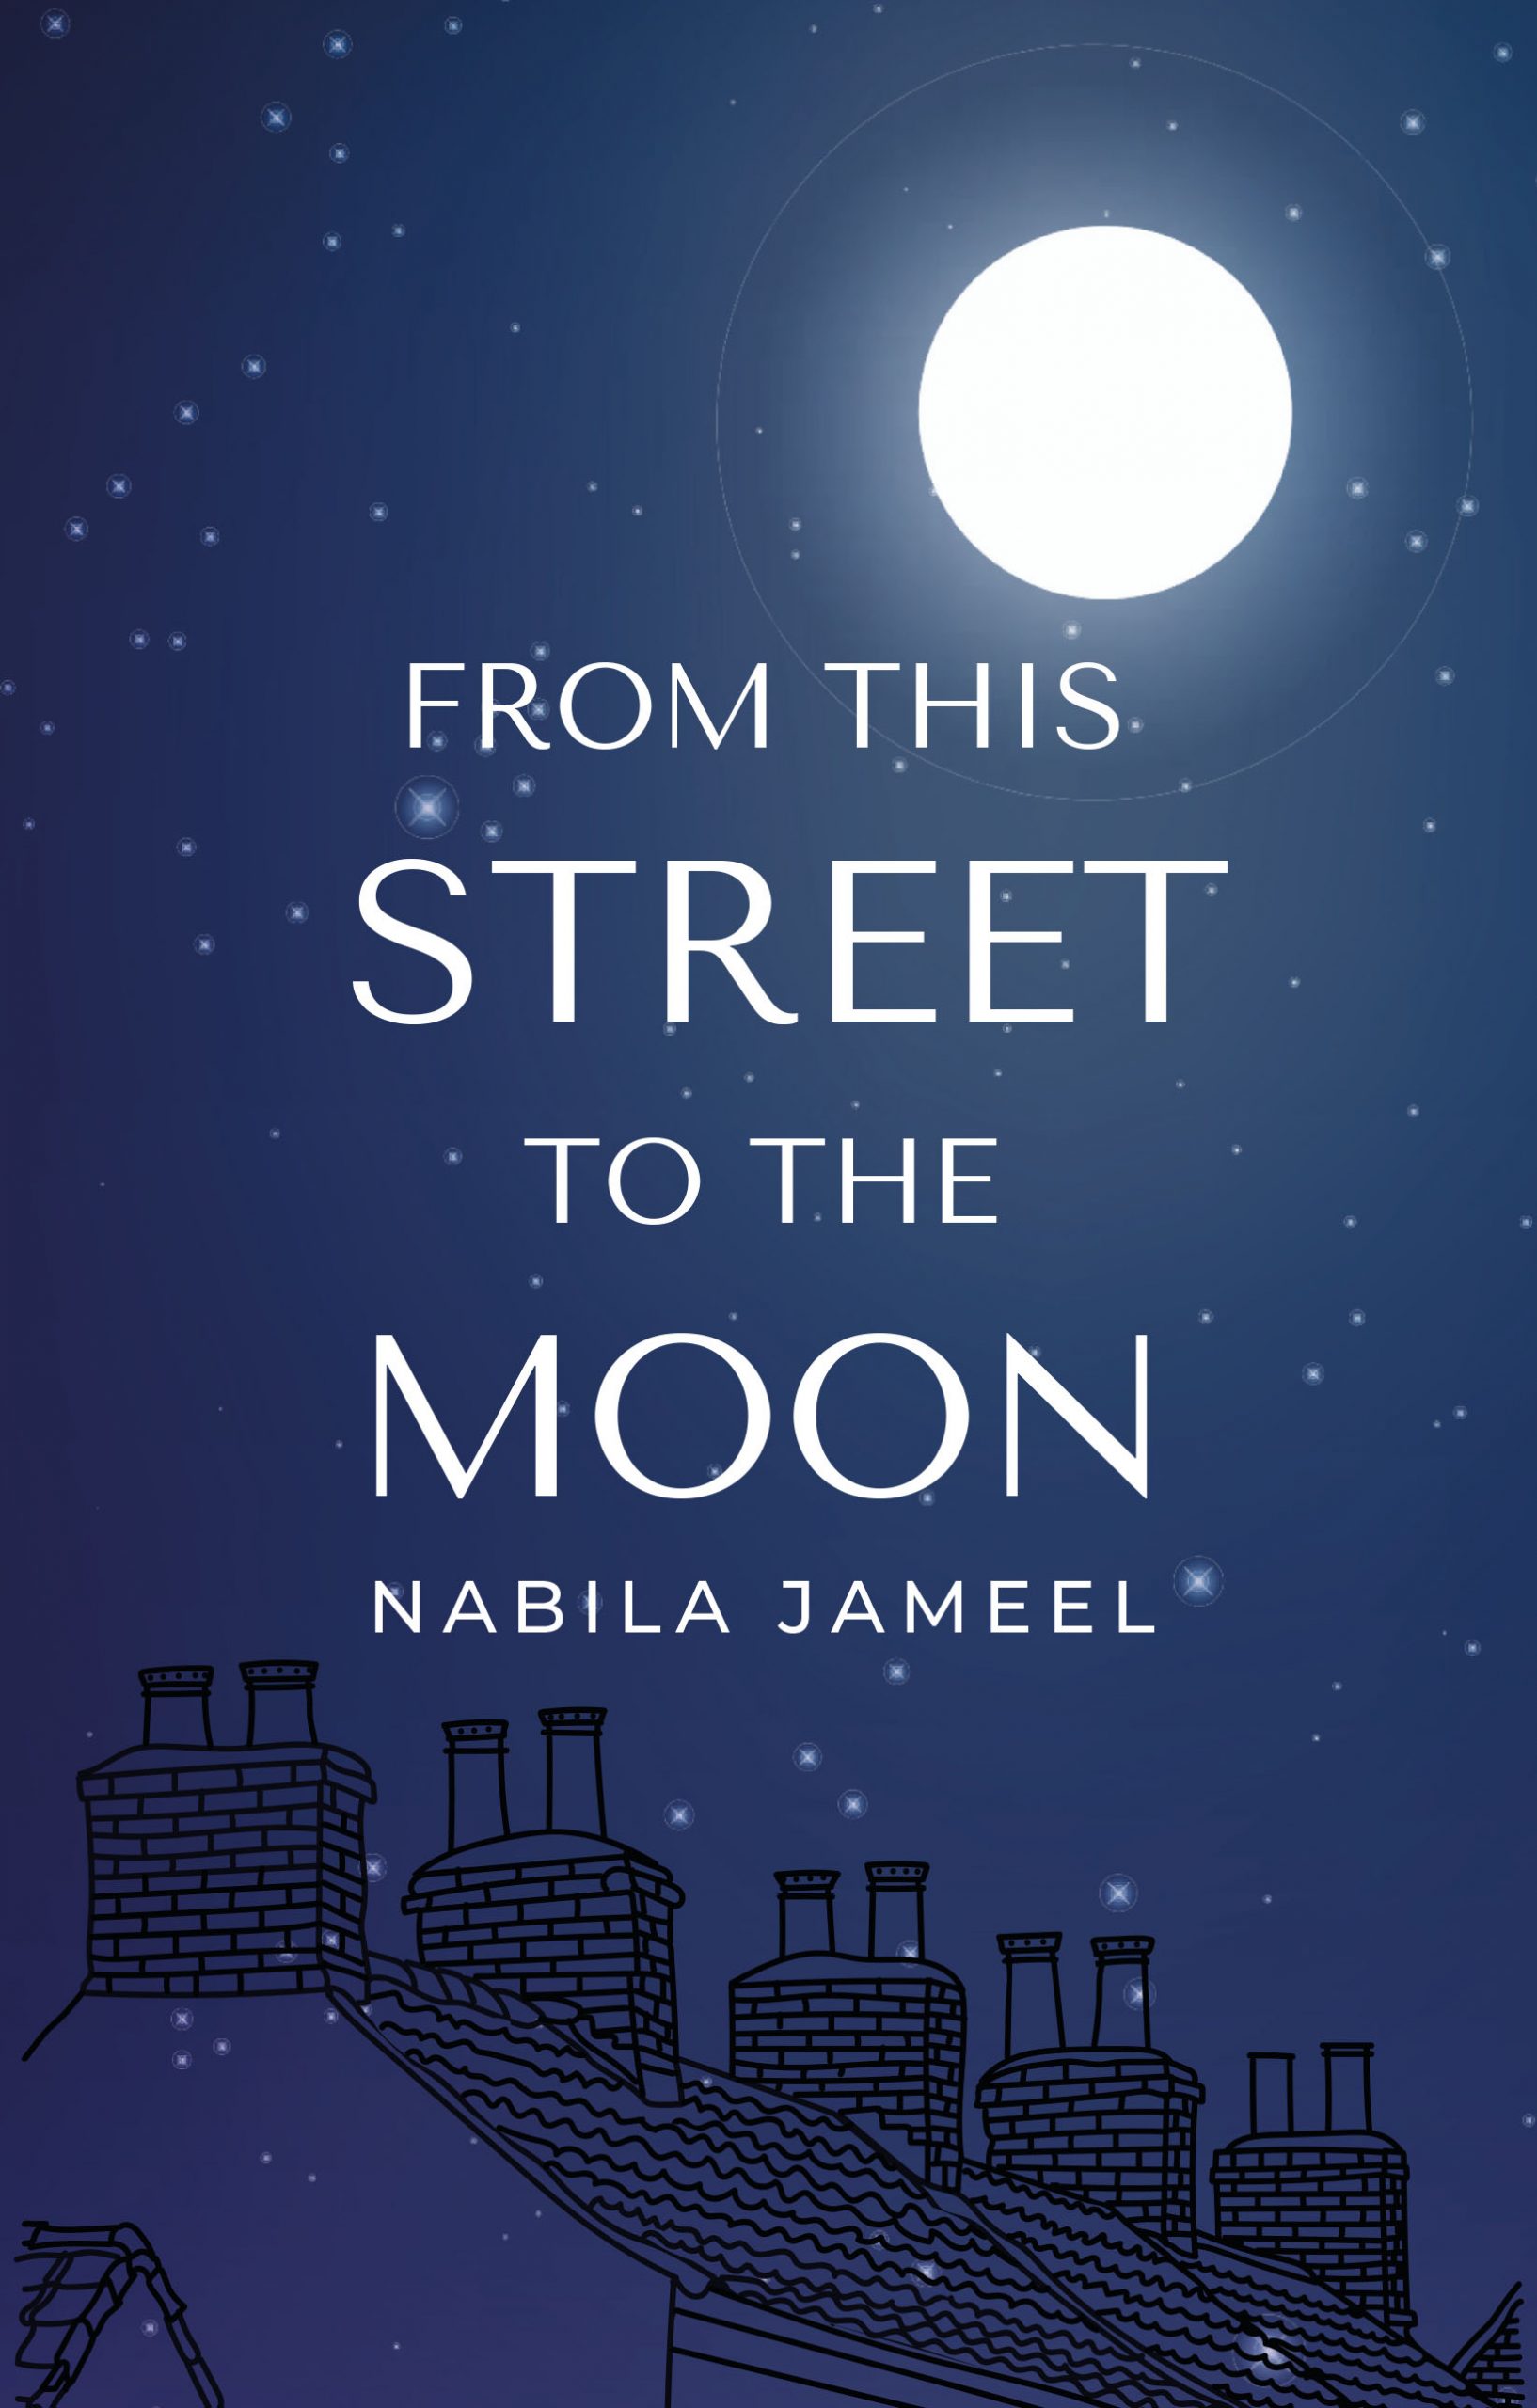 From this Street to the Moon by Nabila Jameel - British Pakistani poet